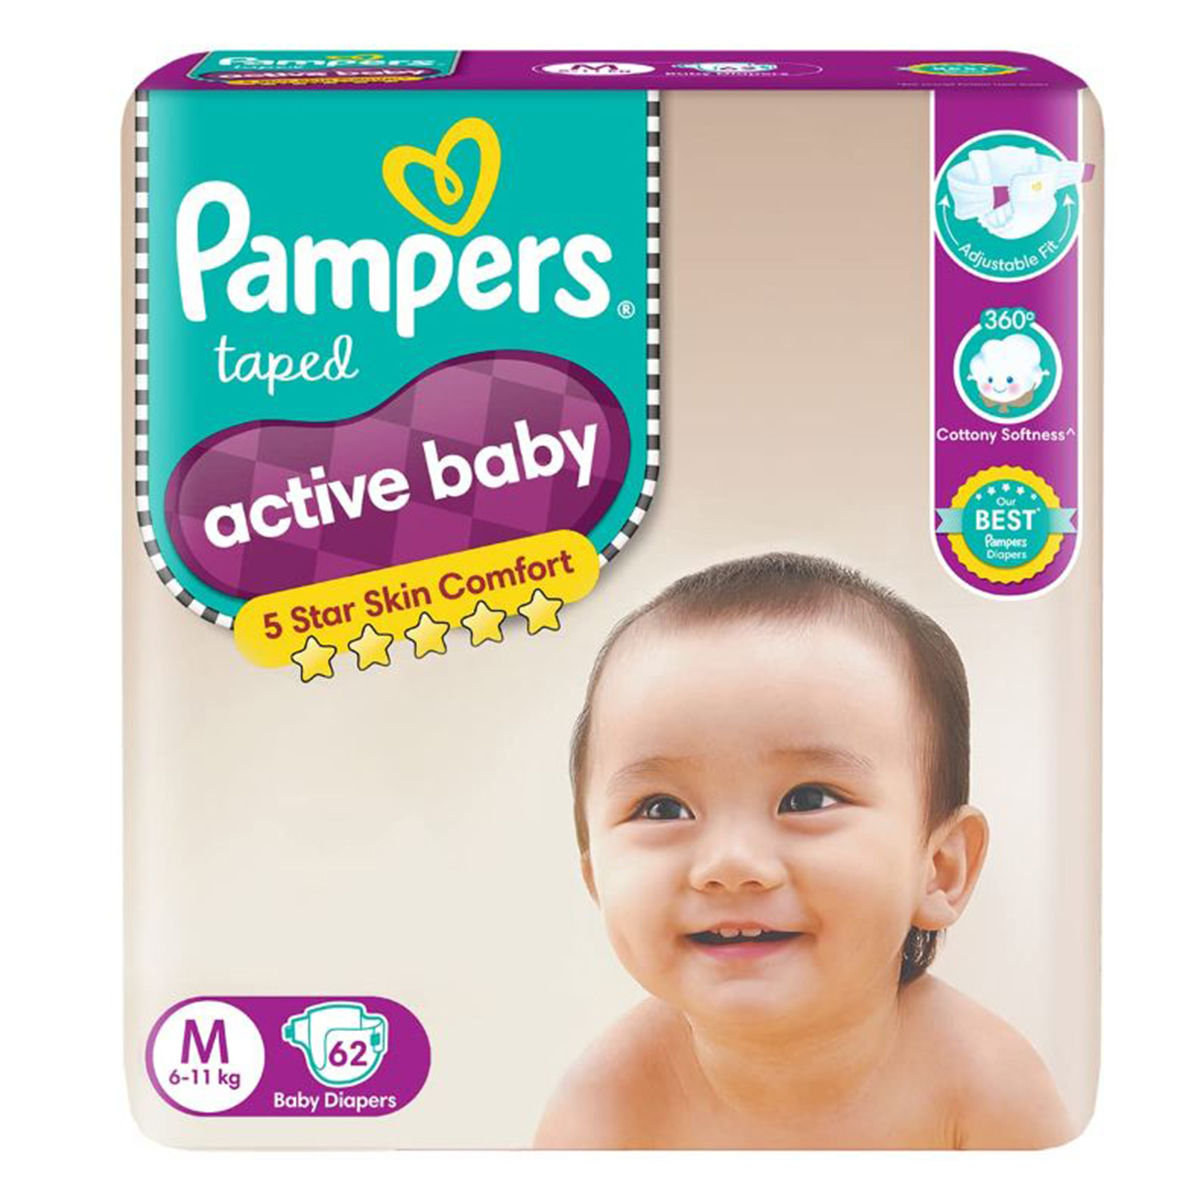 Pampers Active Baby Taped Diapers Medium, 62 Count , Pack of 1 